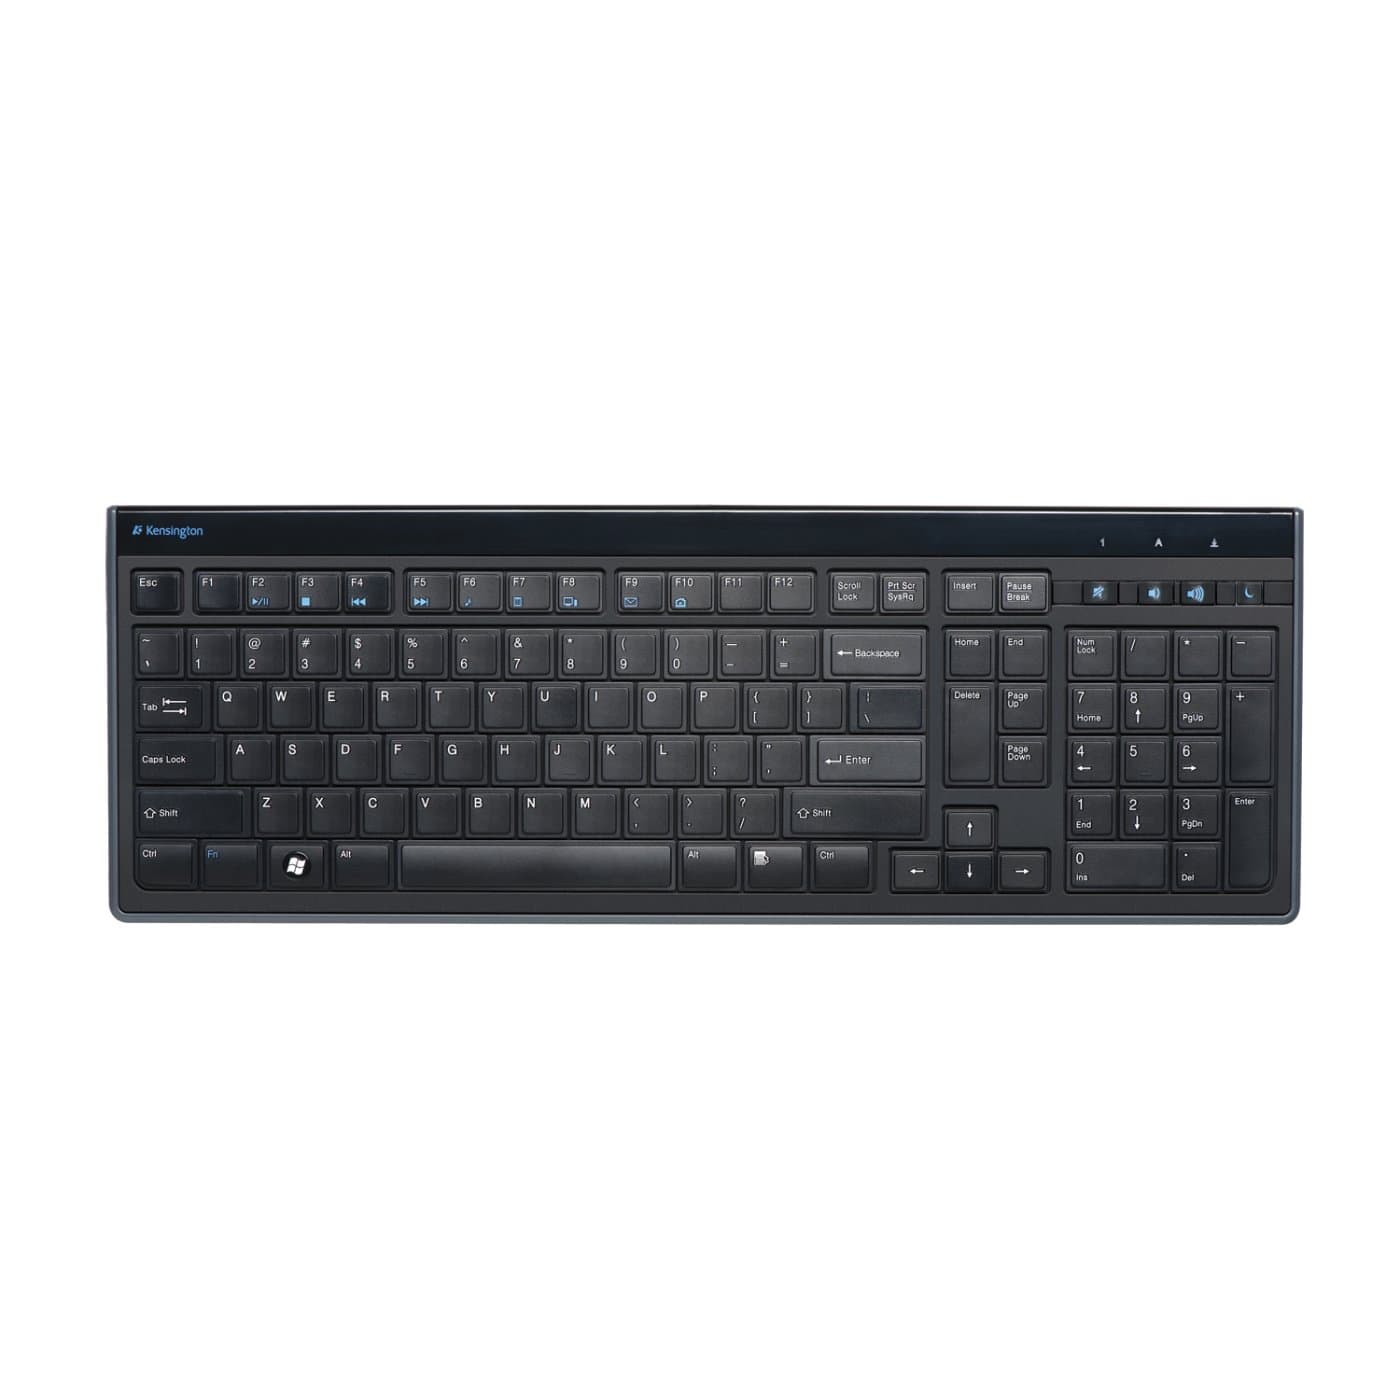 Kensington - Products - Control - Keyboards - Advance Fit™ Full-Size ...